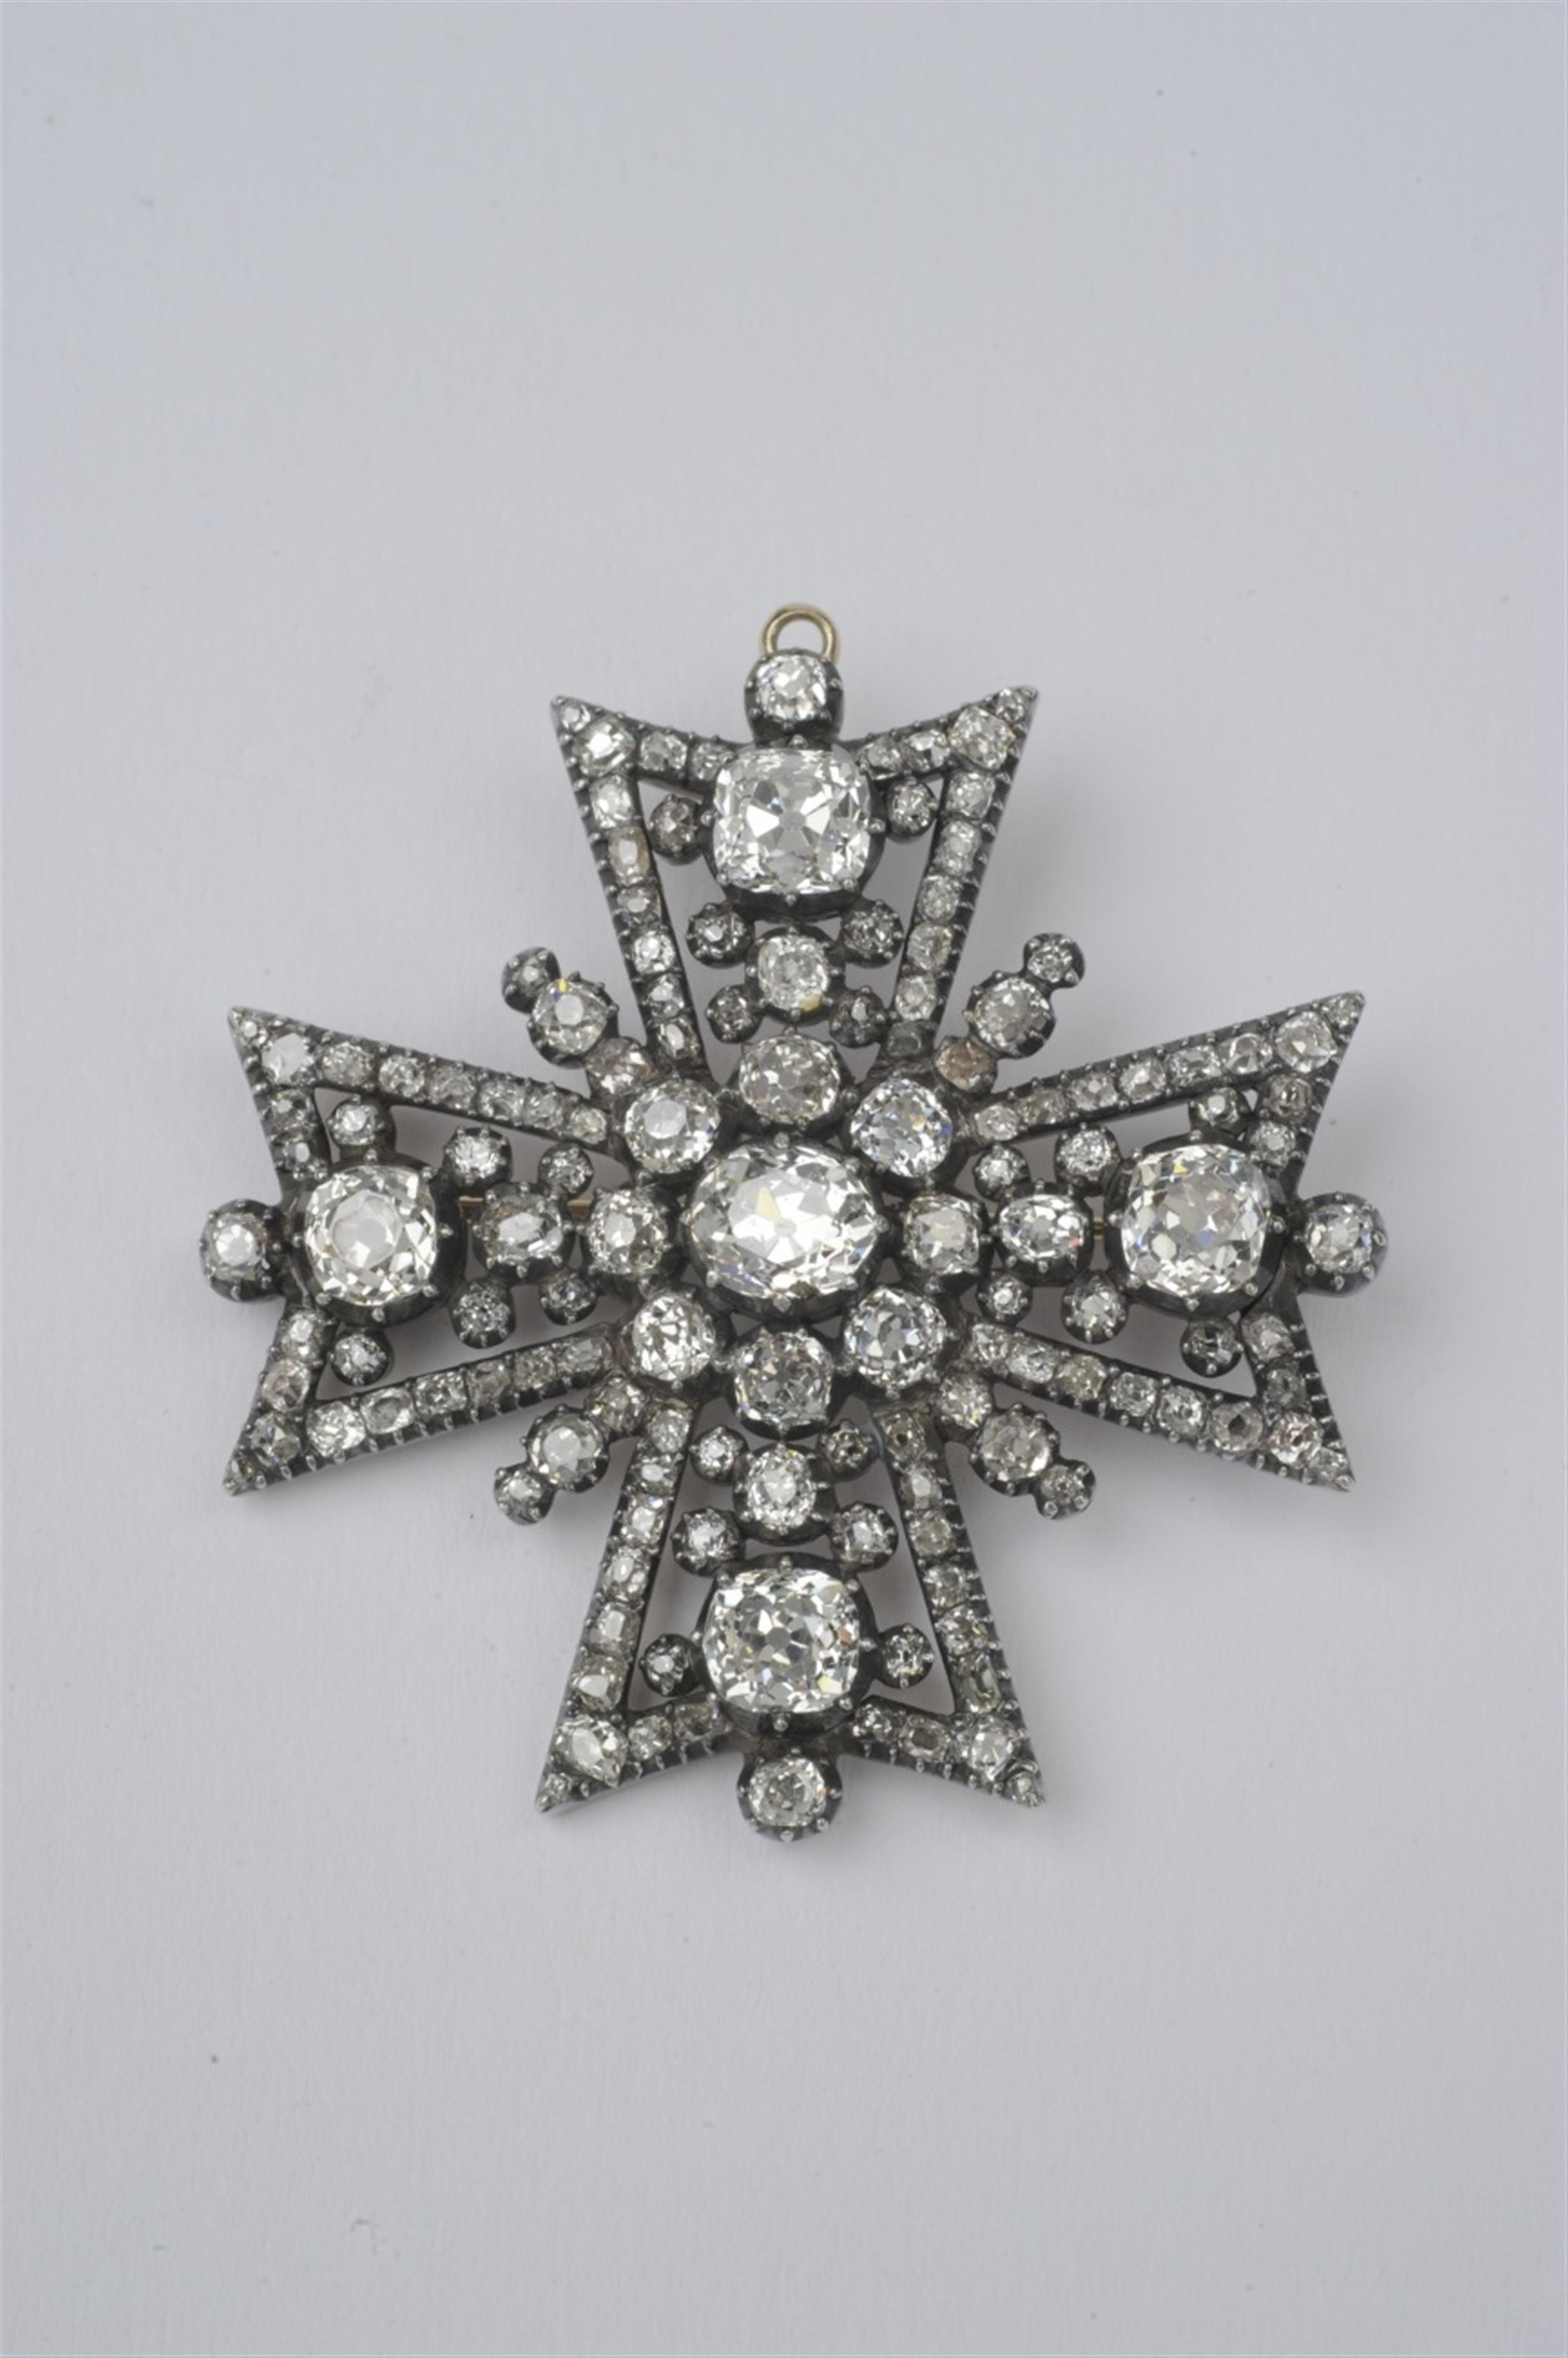 A silver and gold "Maltese Cross" brooch - image-1